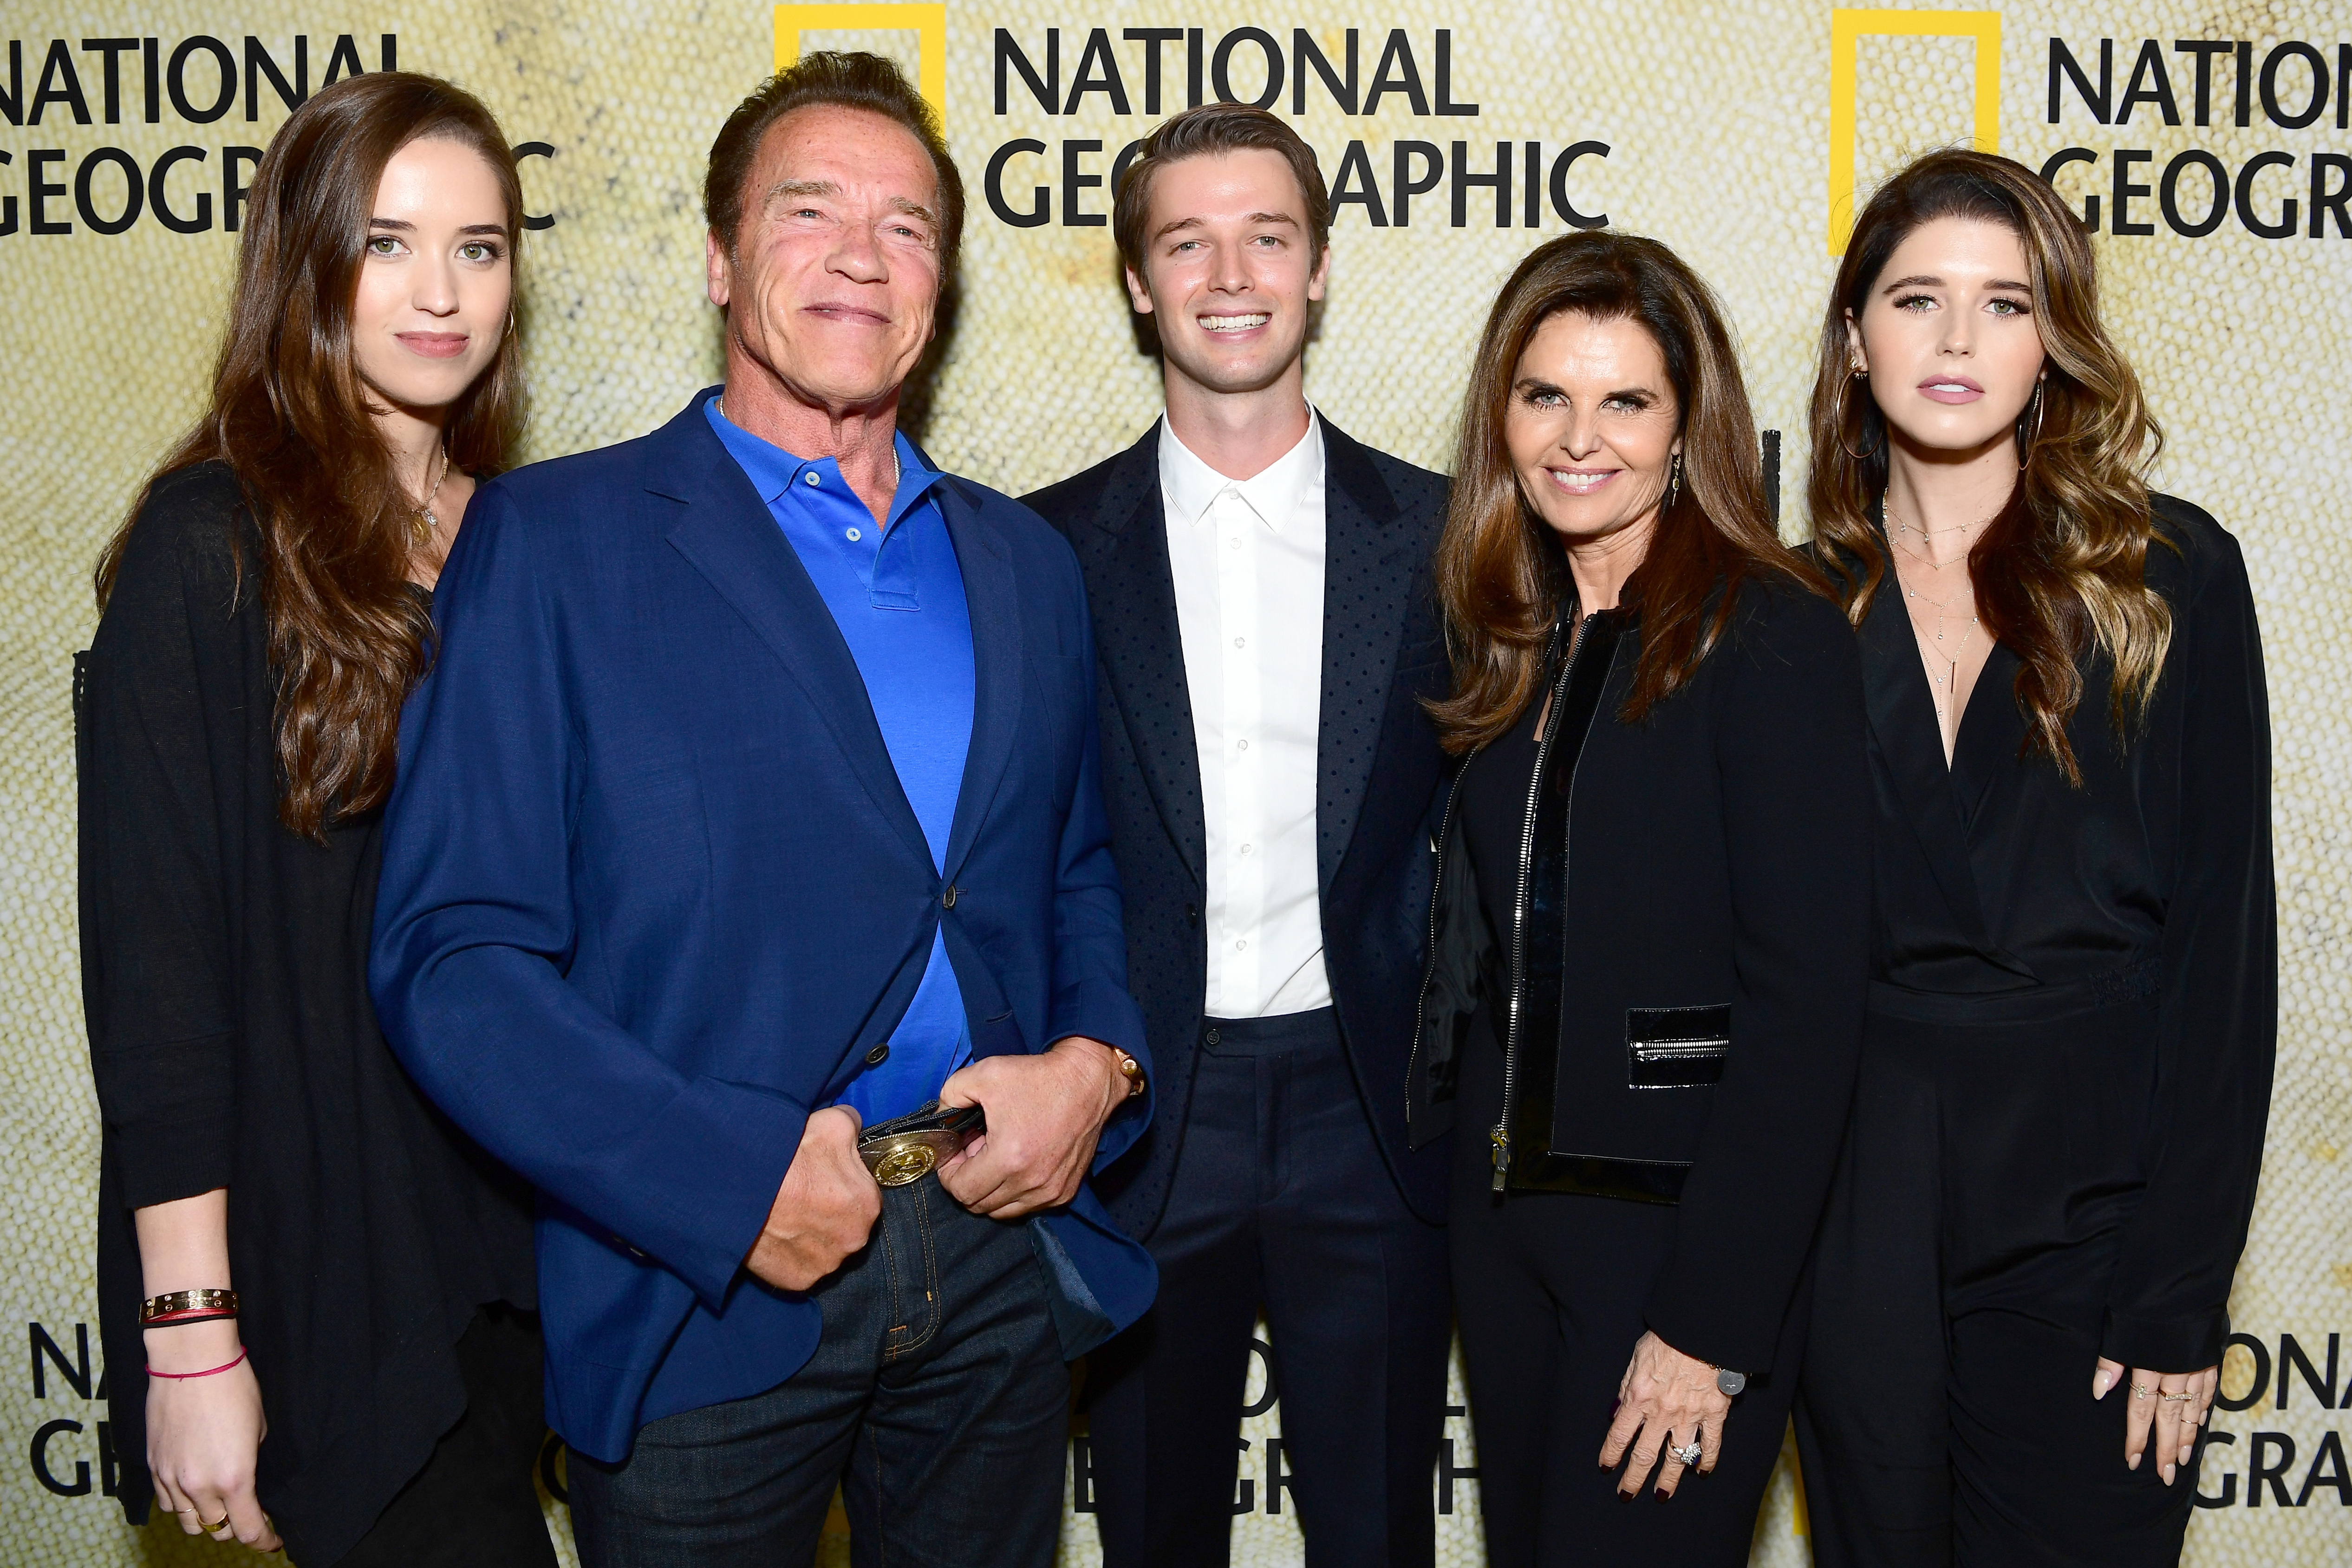 Christina Schwarzenegger, Arnold Schwarzenegger, Patrick Schwarzenegger, Maria Shriver, and Katherine Schwarzenegger at the premiere of National Geographic's "The Long Road Home" in Los Angeles, California on October 30, 2017 | Source: Getty Images